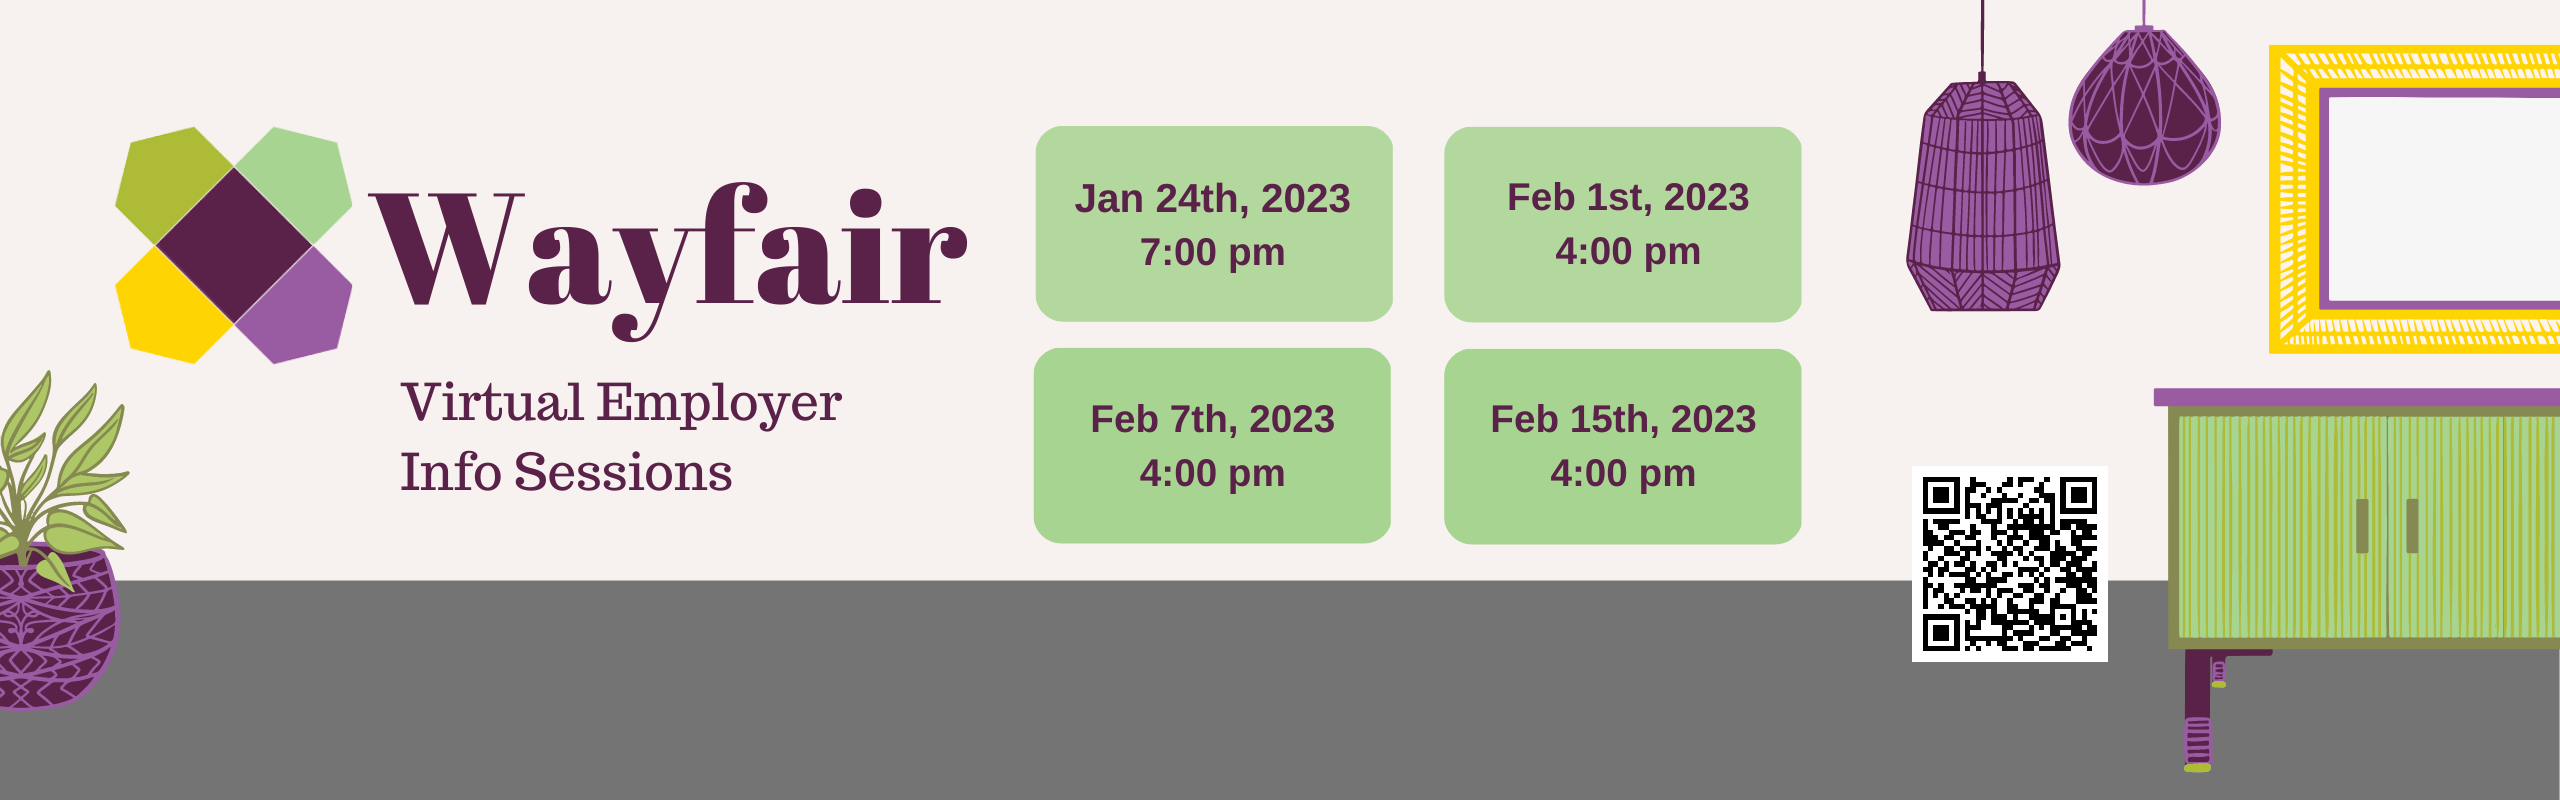 Wayfair info sessions throughout february review EJN for more details